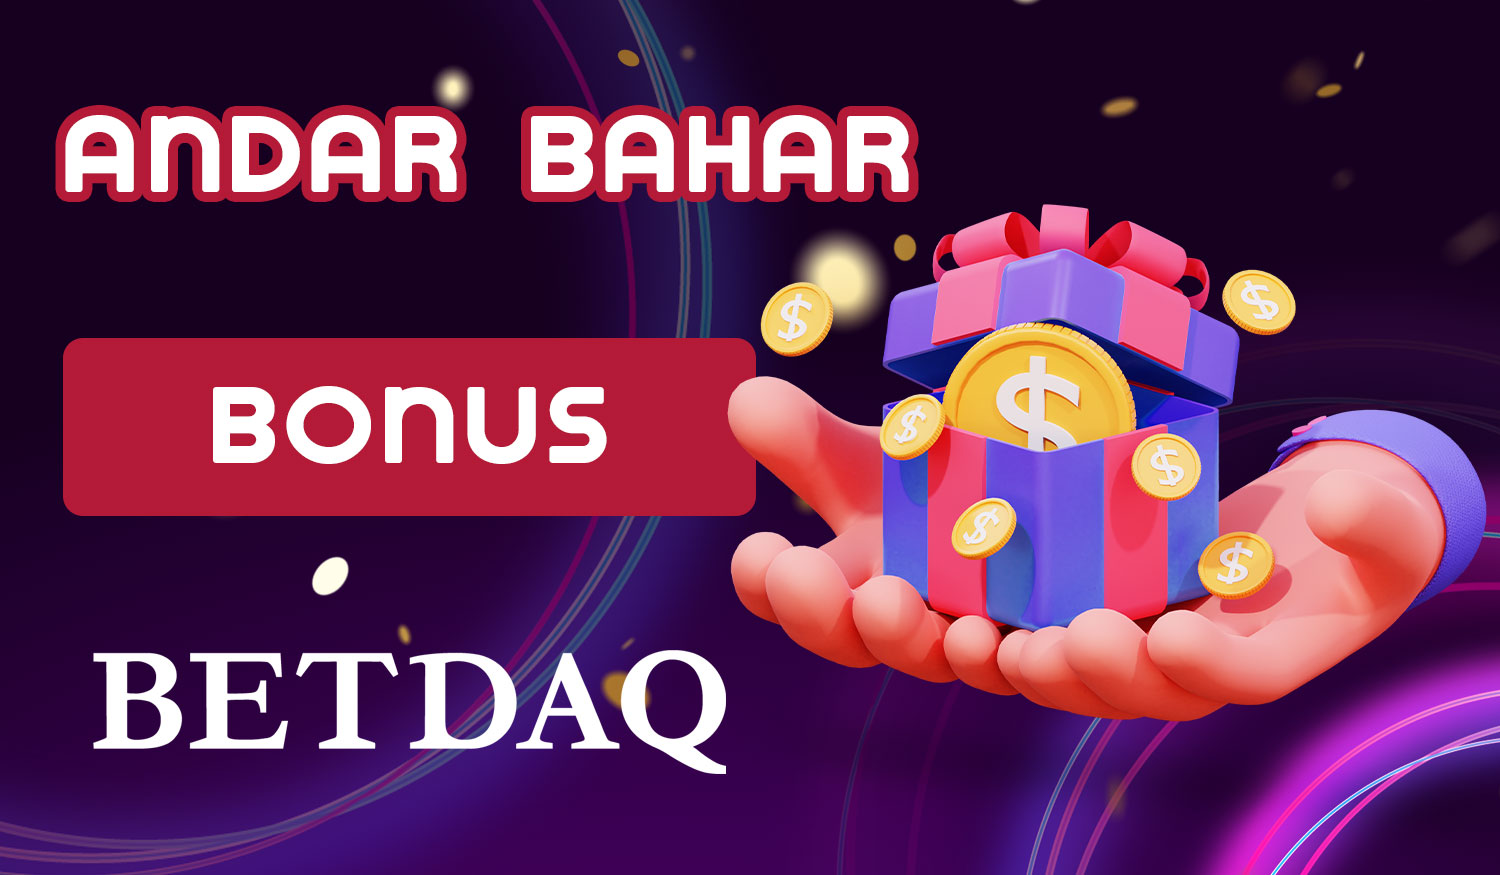 Detailed review of bonuses offered by the Betdaq bookmaker for players from India